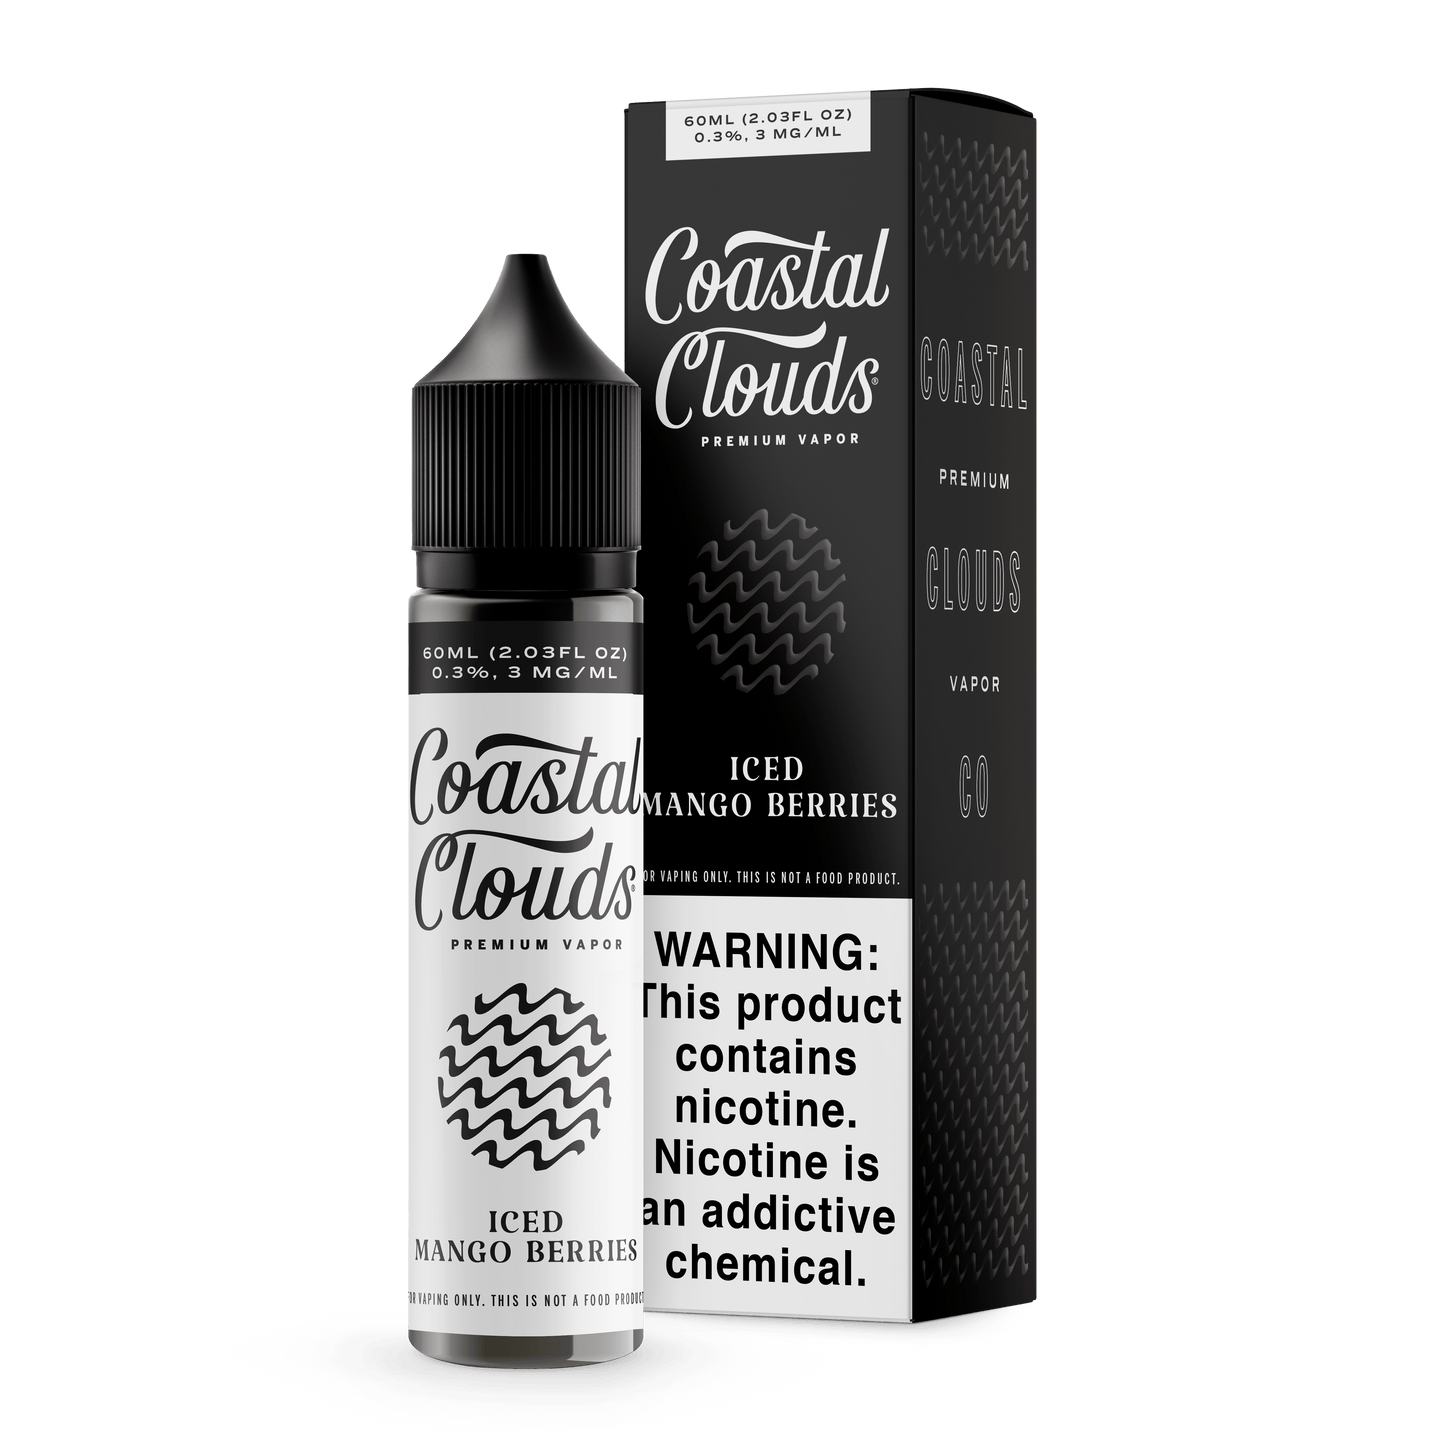 Iced Mango Berries by Coastal Clouds Series 60mL with Packaging